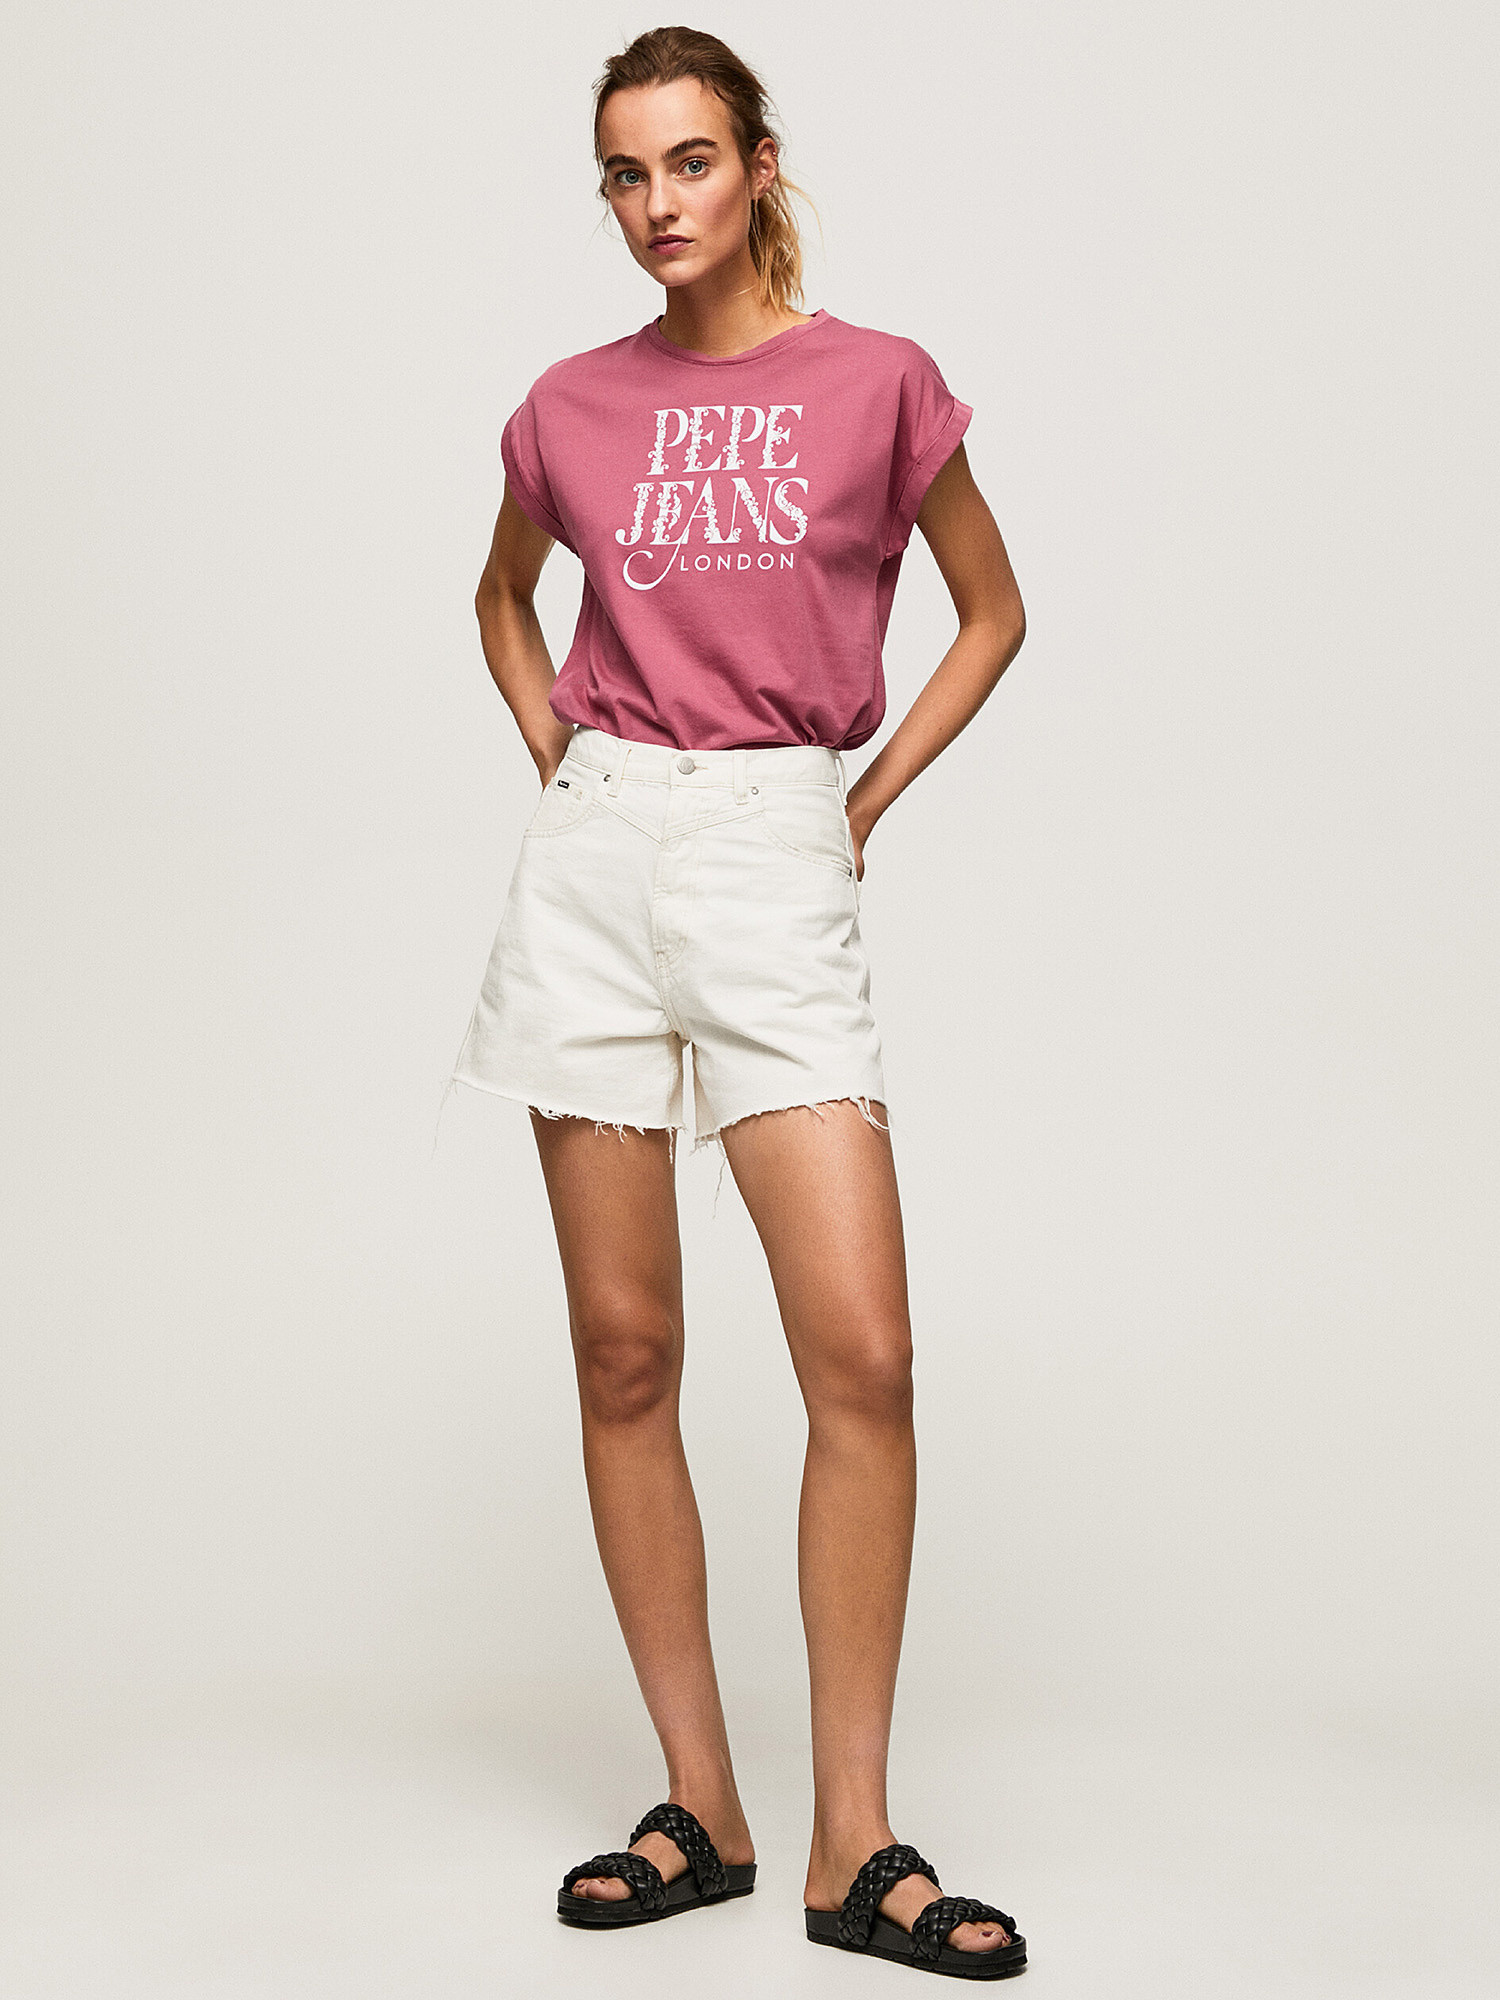 Pepe Jeans - T-shirt con logo in cotone, Rosa scuro, large image number 6